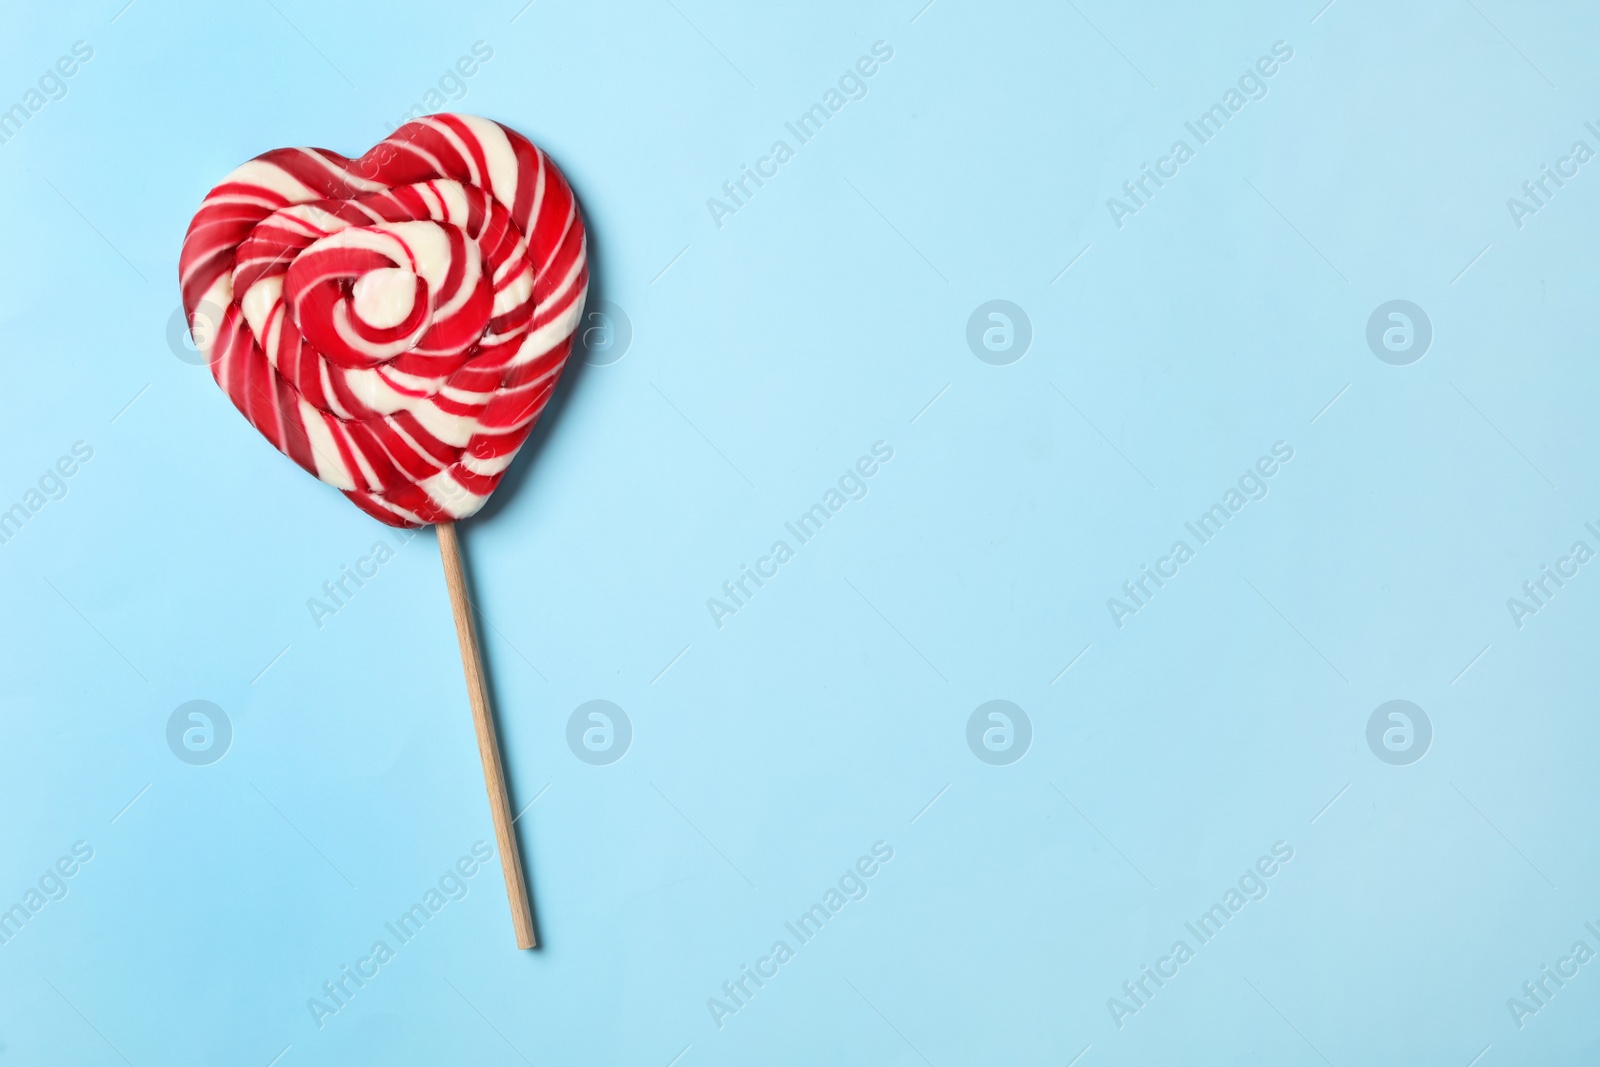 Photo of Sweet heart shaped lollipop on light blue background, top view with space for text. Valentine's day celebration